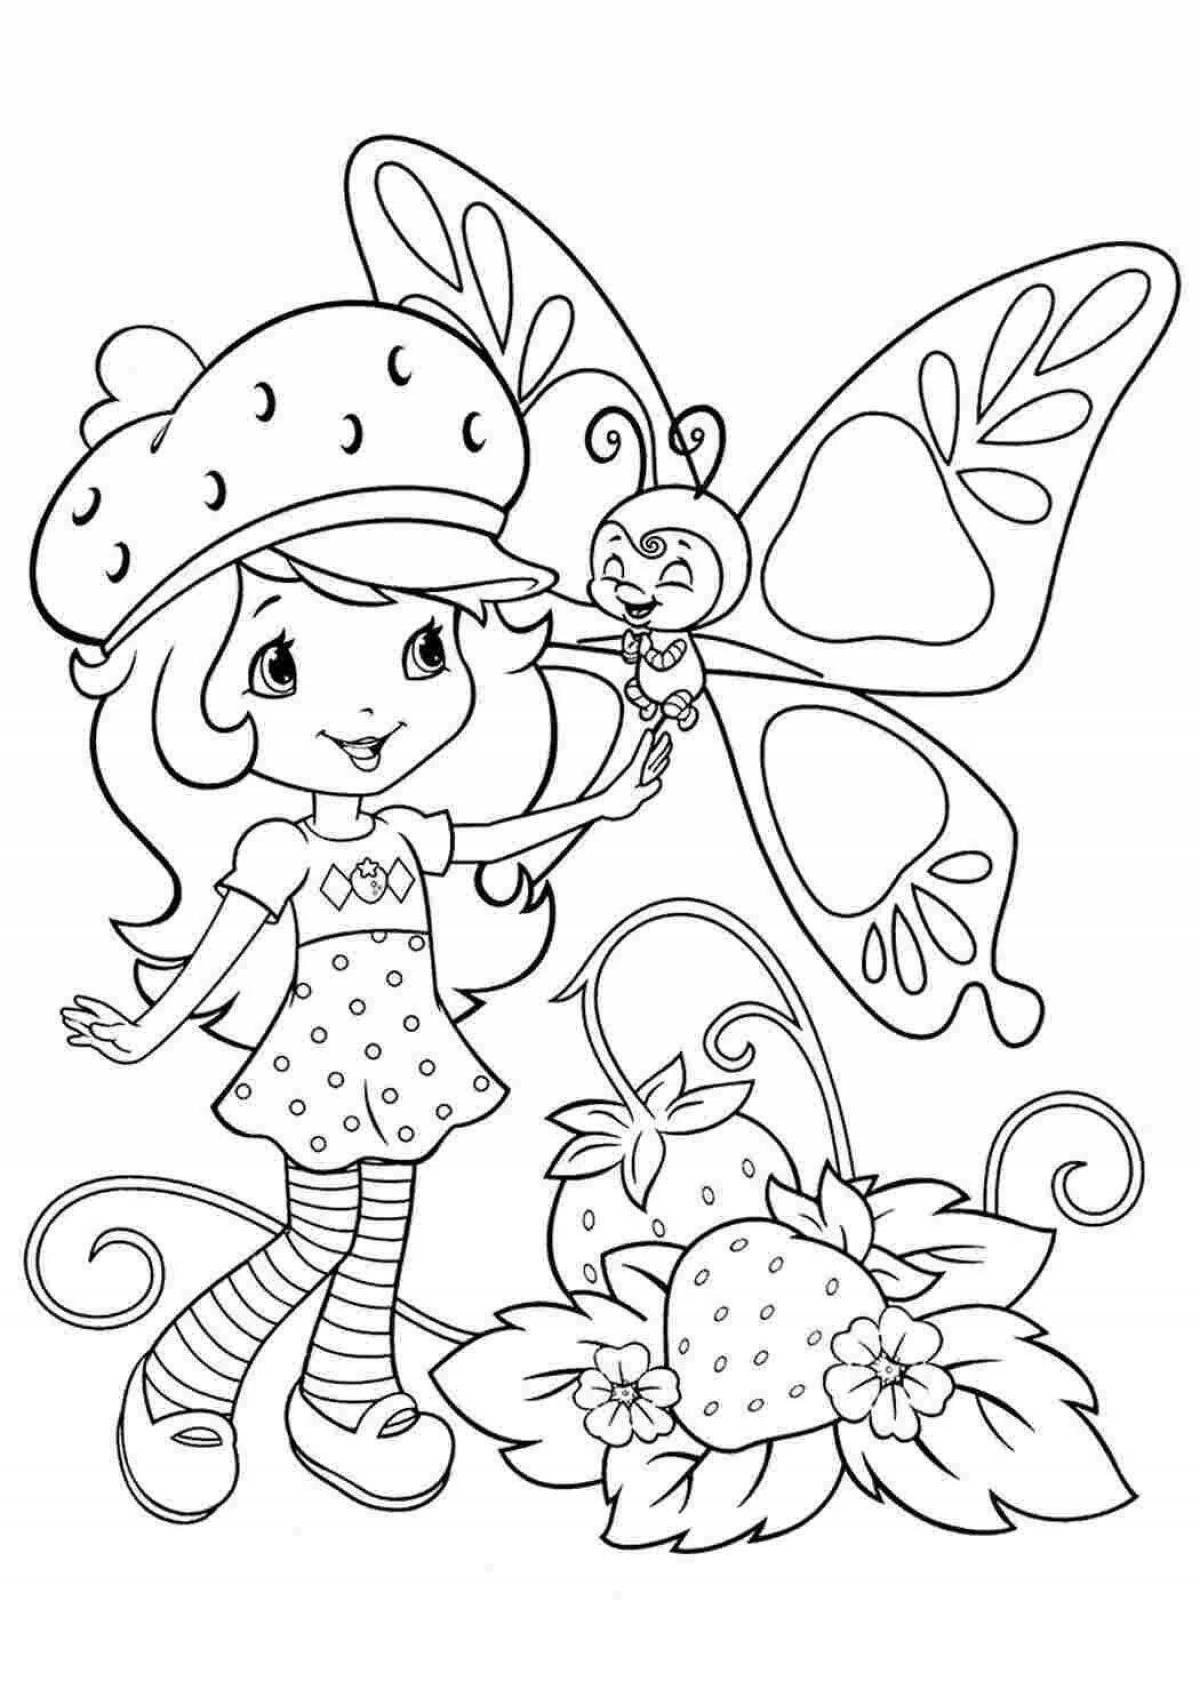 Fairytale coloring 4 for girls